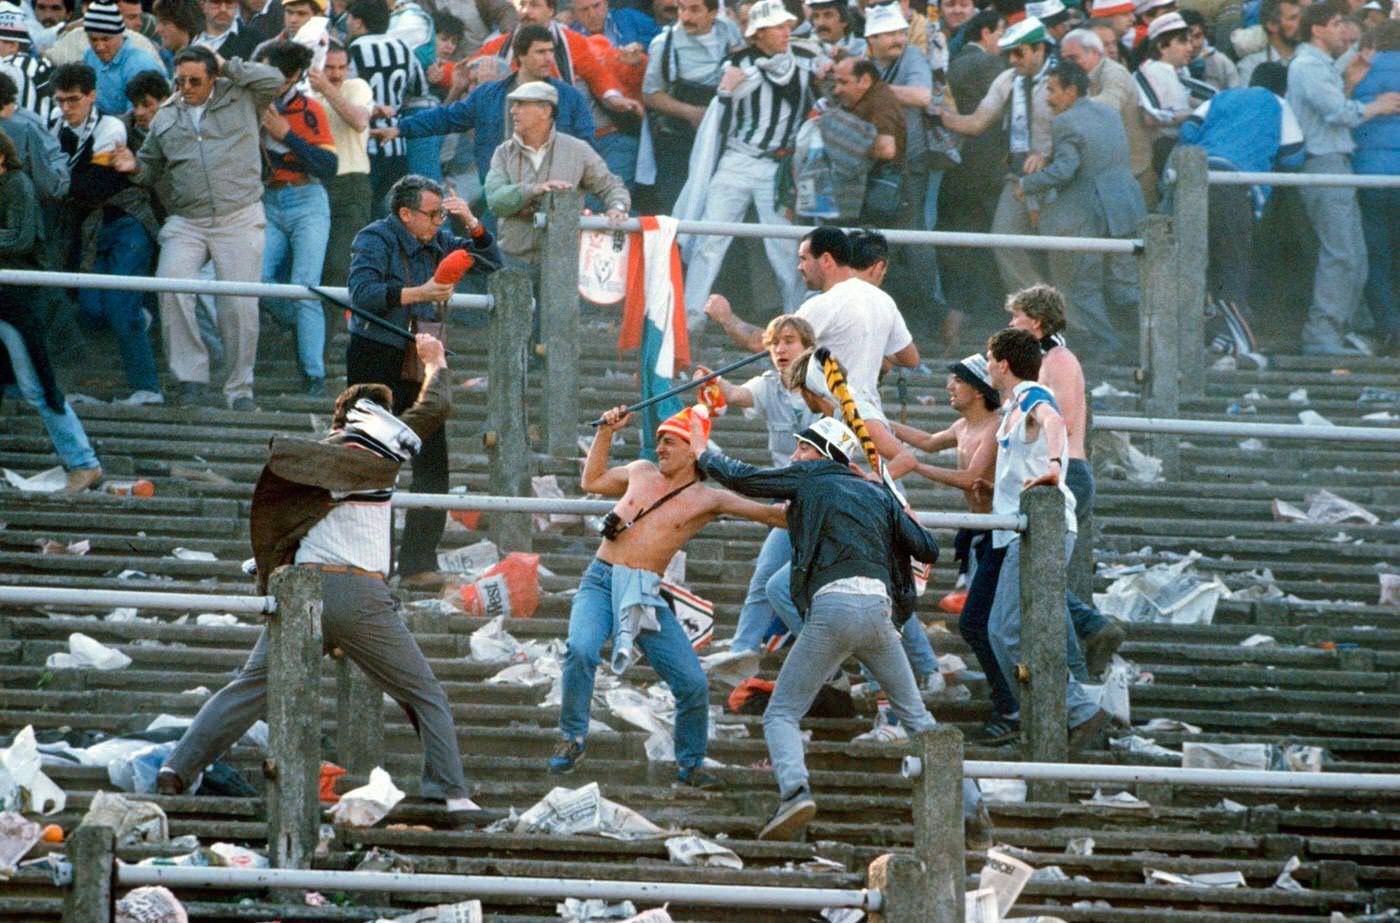 Tragedy at Brussels Heysel Stadium during European Cup Final, 1985.